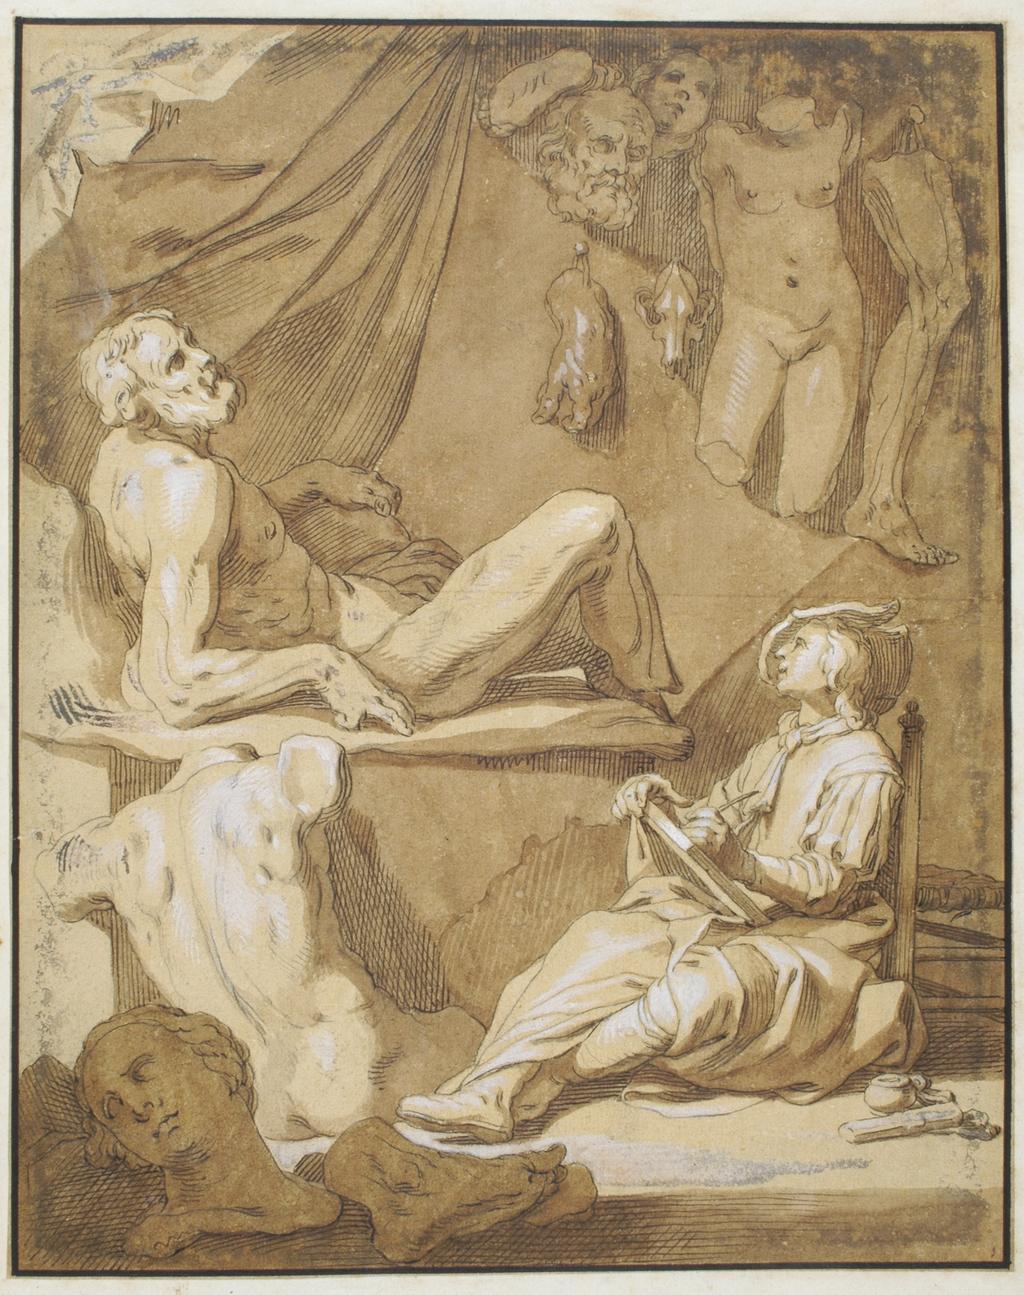 An image of An artist sketching from a statue. Bloemaert, Abraham (Dutch, 1564-1651). Pen and black ink, light brown wash, heightened with white (slightly oxidised), traces of graphite underdrawing, surrounded by ruled ink line, on laid paper, stuck to album sheet, which has been cut to show the verso of the support. Height, support, 280 mm, width 223 mm; height,  leaf, 397 mm, width 301 mm. Leather bound album containing 161 drawings. Cover boards with gold tooling. Edges of leaves gilt. Book bound in 18th Century (binding paper). PD.166-1963.f5